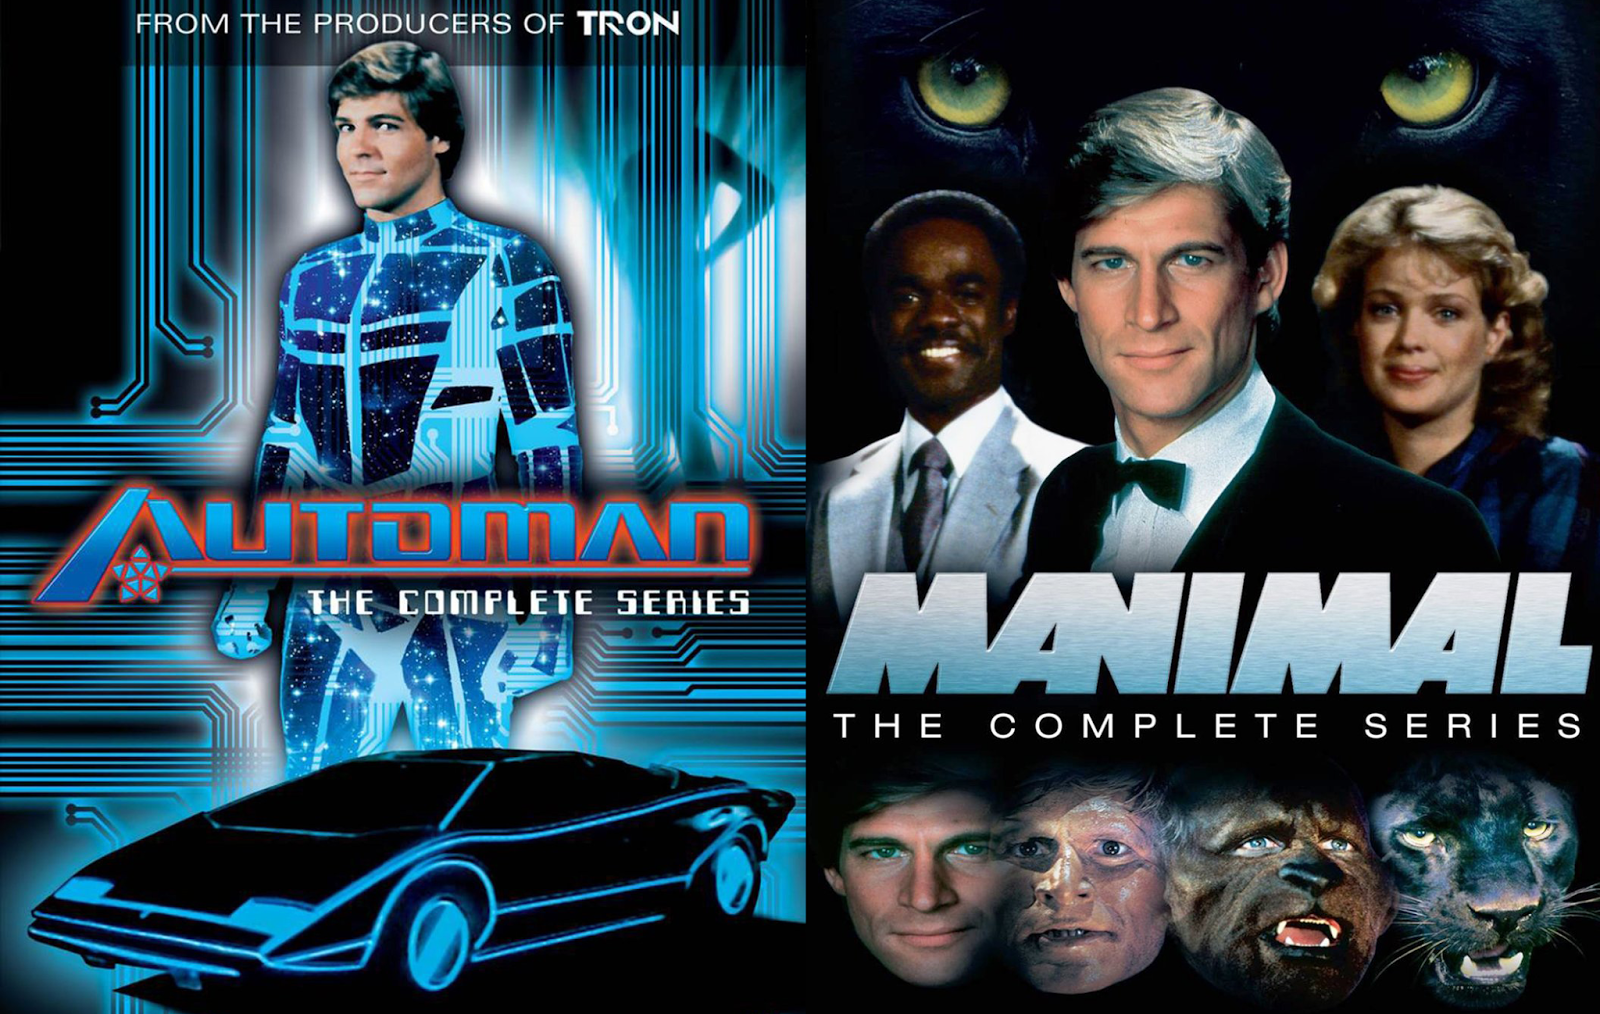 Shortlived 80s Tv Shows Automan And Manimal Coming To Dvd This November